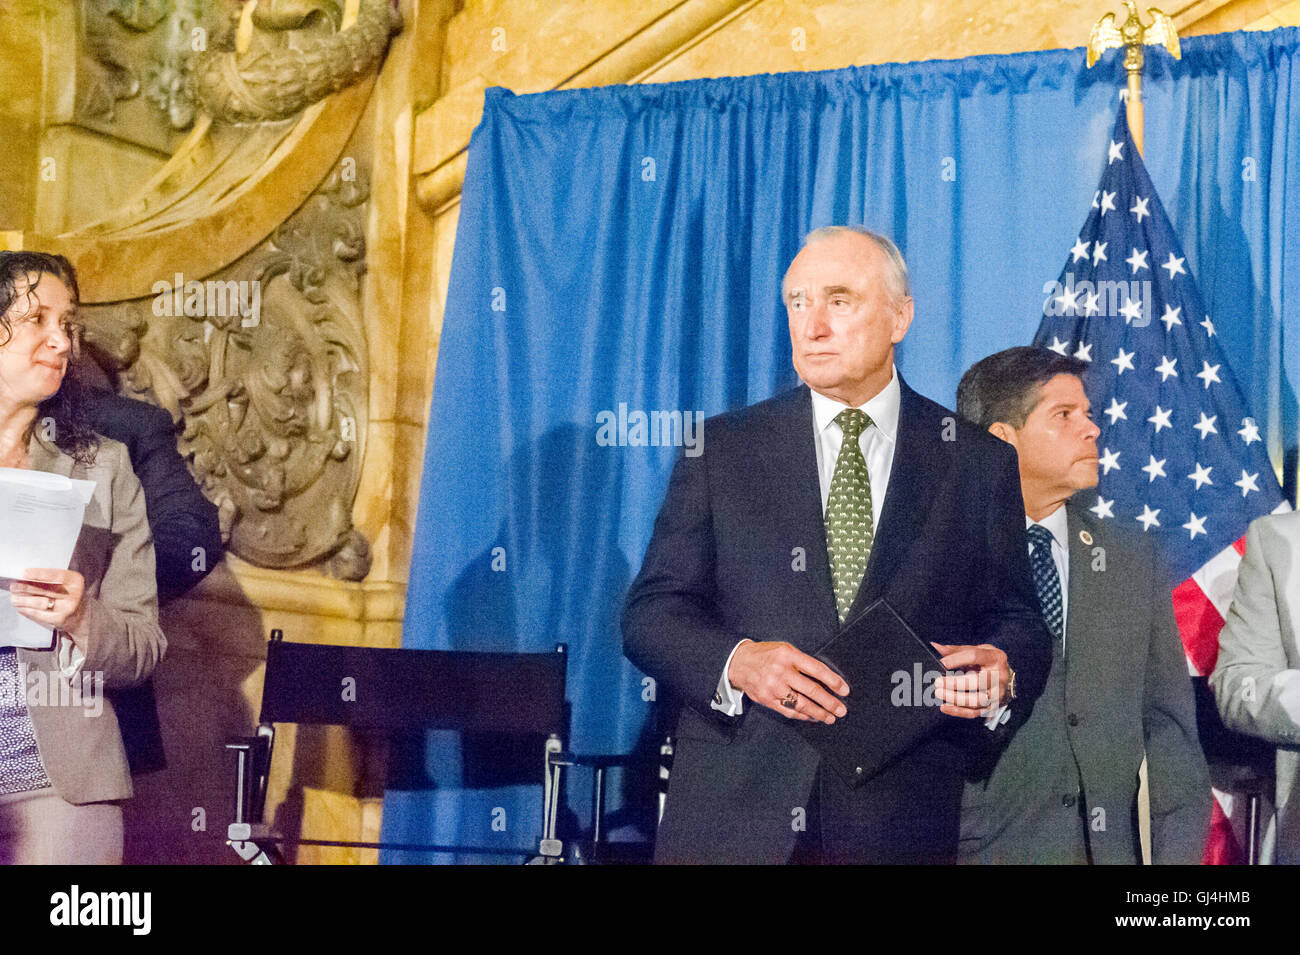 NYPD Commissioner William Bratton at a bill signing related to NYPD reporting procedures on Wednesday, August 3, 2016 in New York. (© Frances M. Roberts) Stock Photo